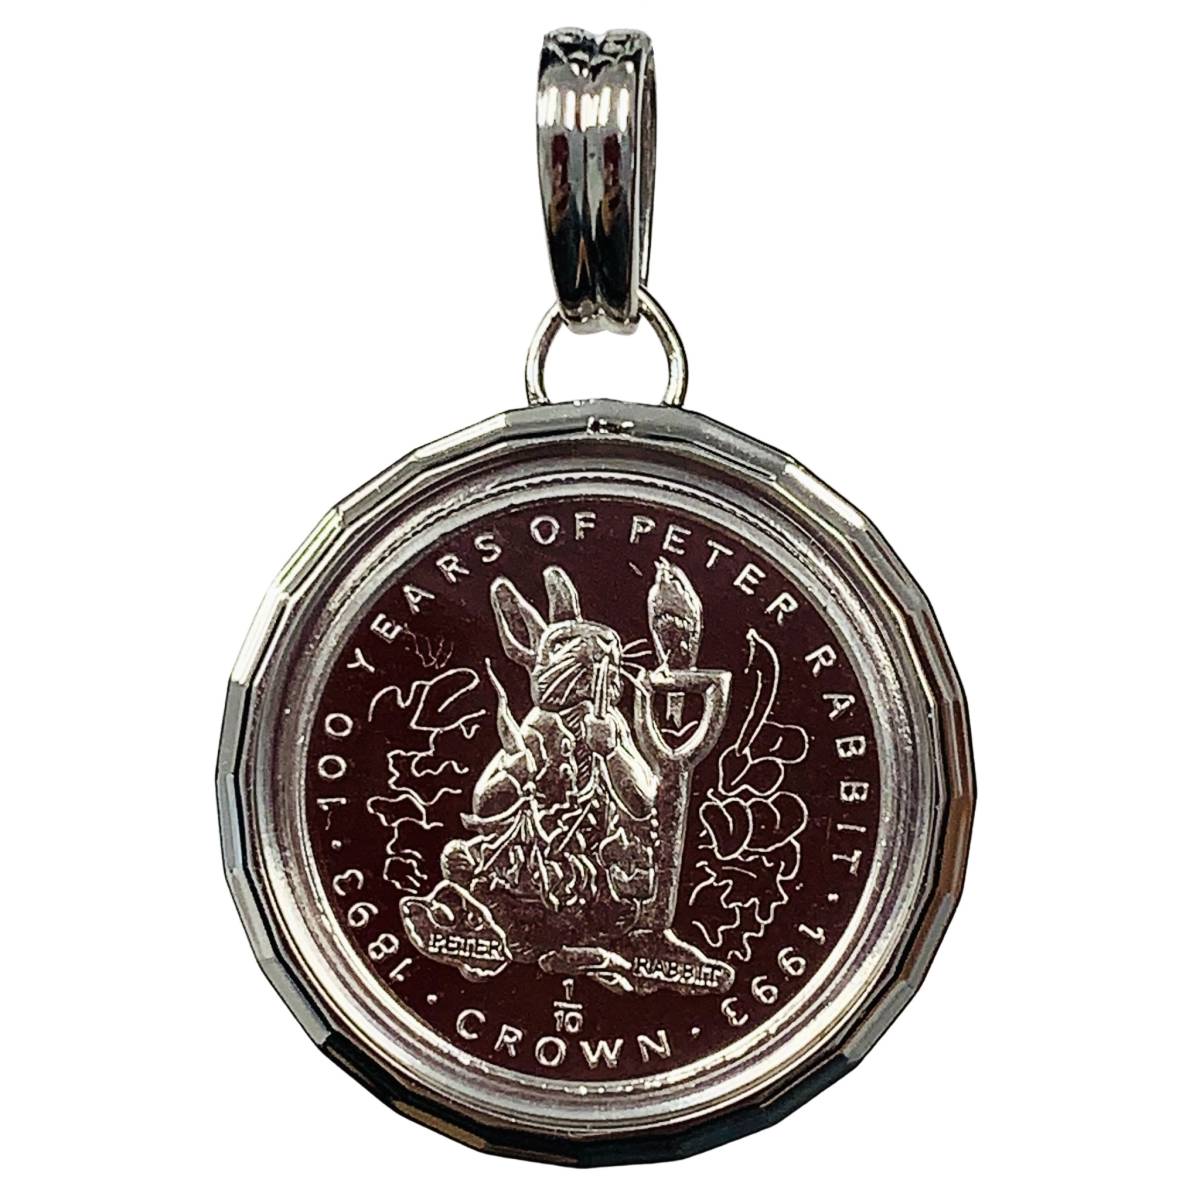  Peter Rabbit platinum .jiblarutaru1993 year platinum 1/10 ounce 8.2g coin pendant top collection protection glass attaching 